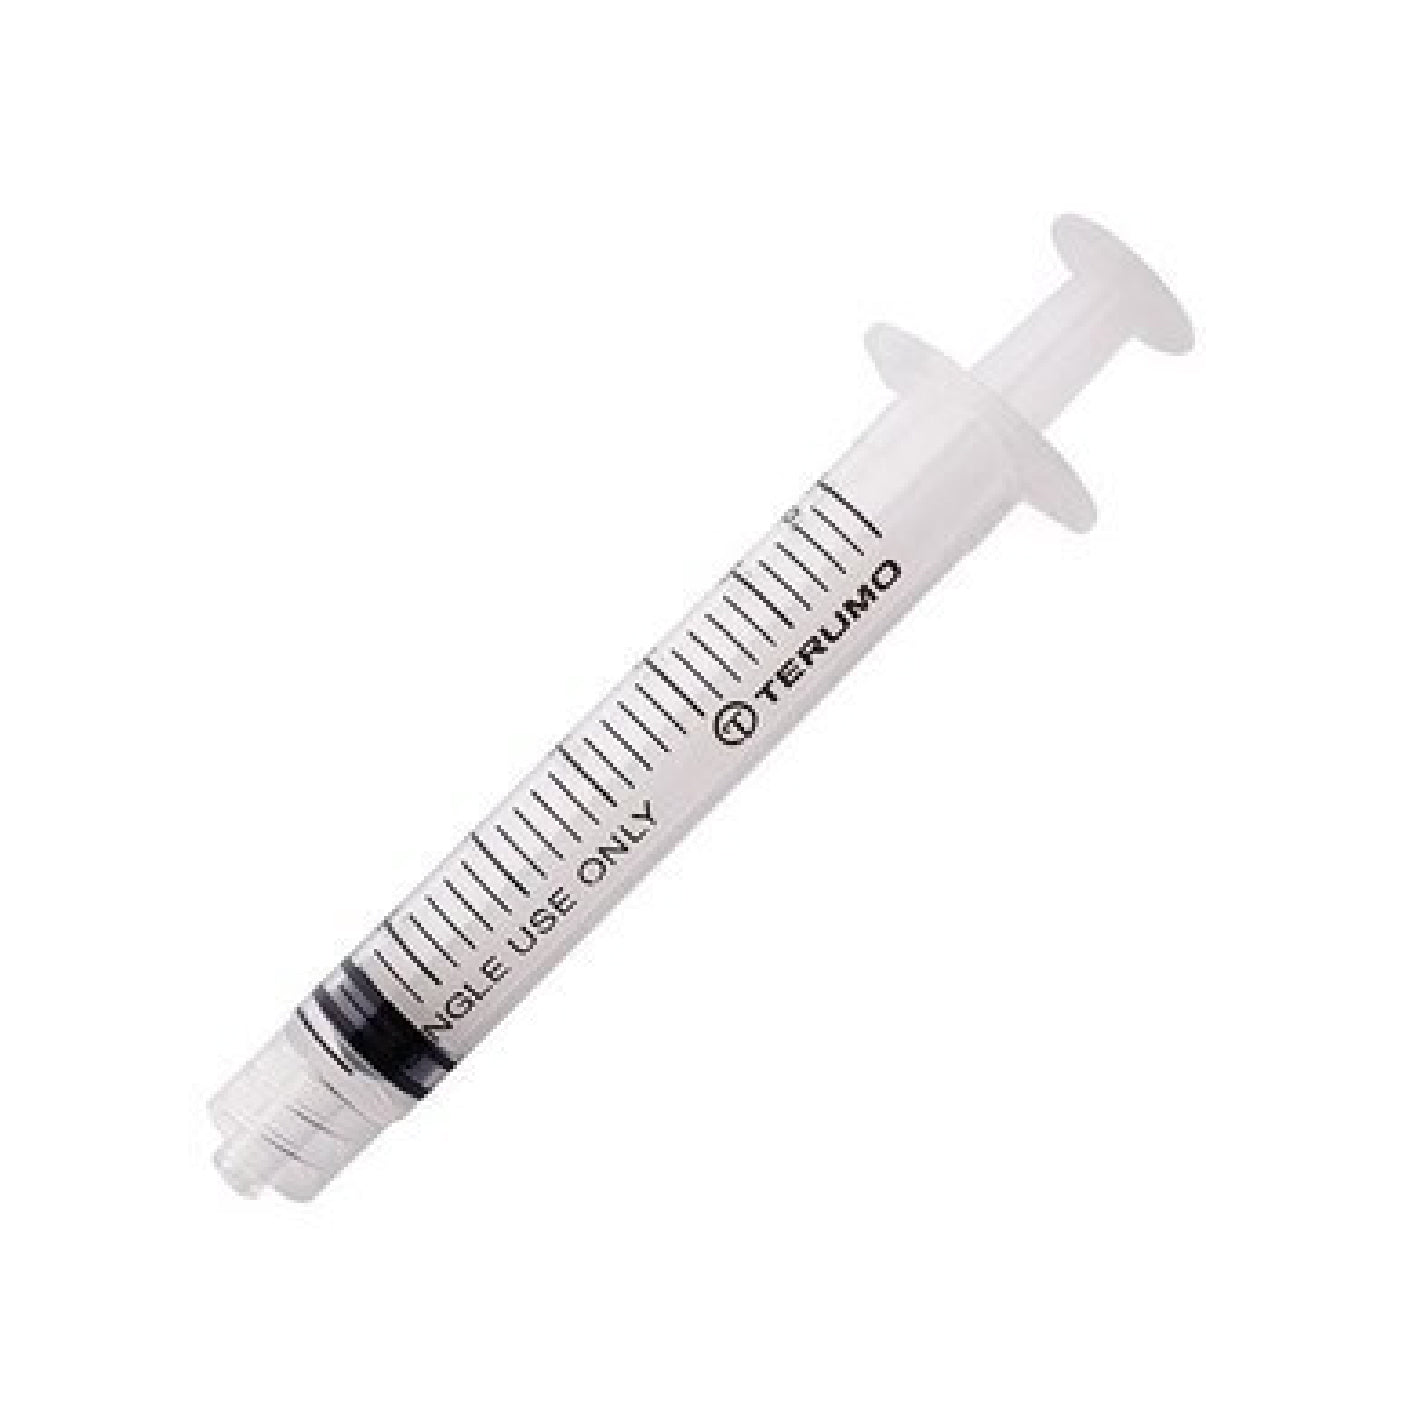 Terumo SS-03L Hypodermic Syringes without Needle | Luer Lock | 3mL- 100 per Box